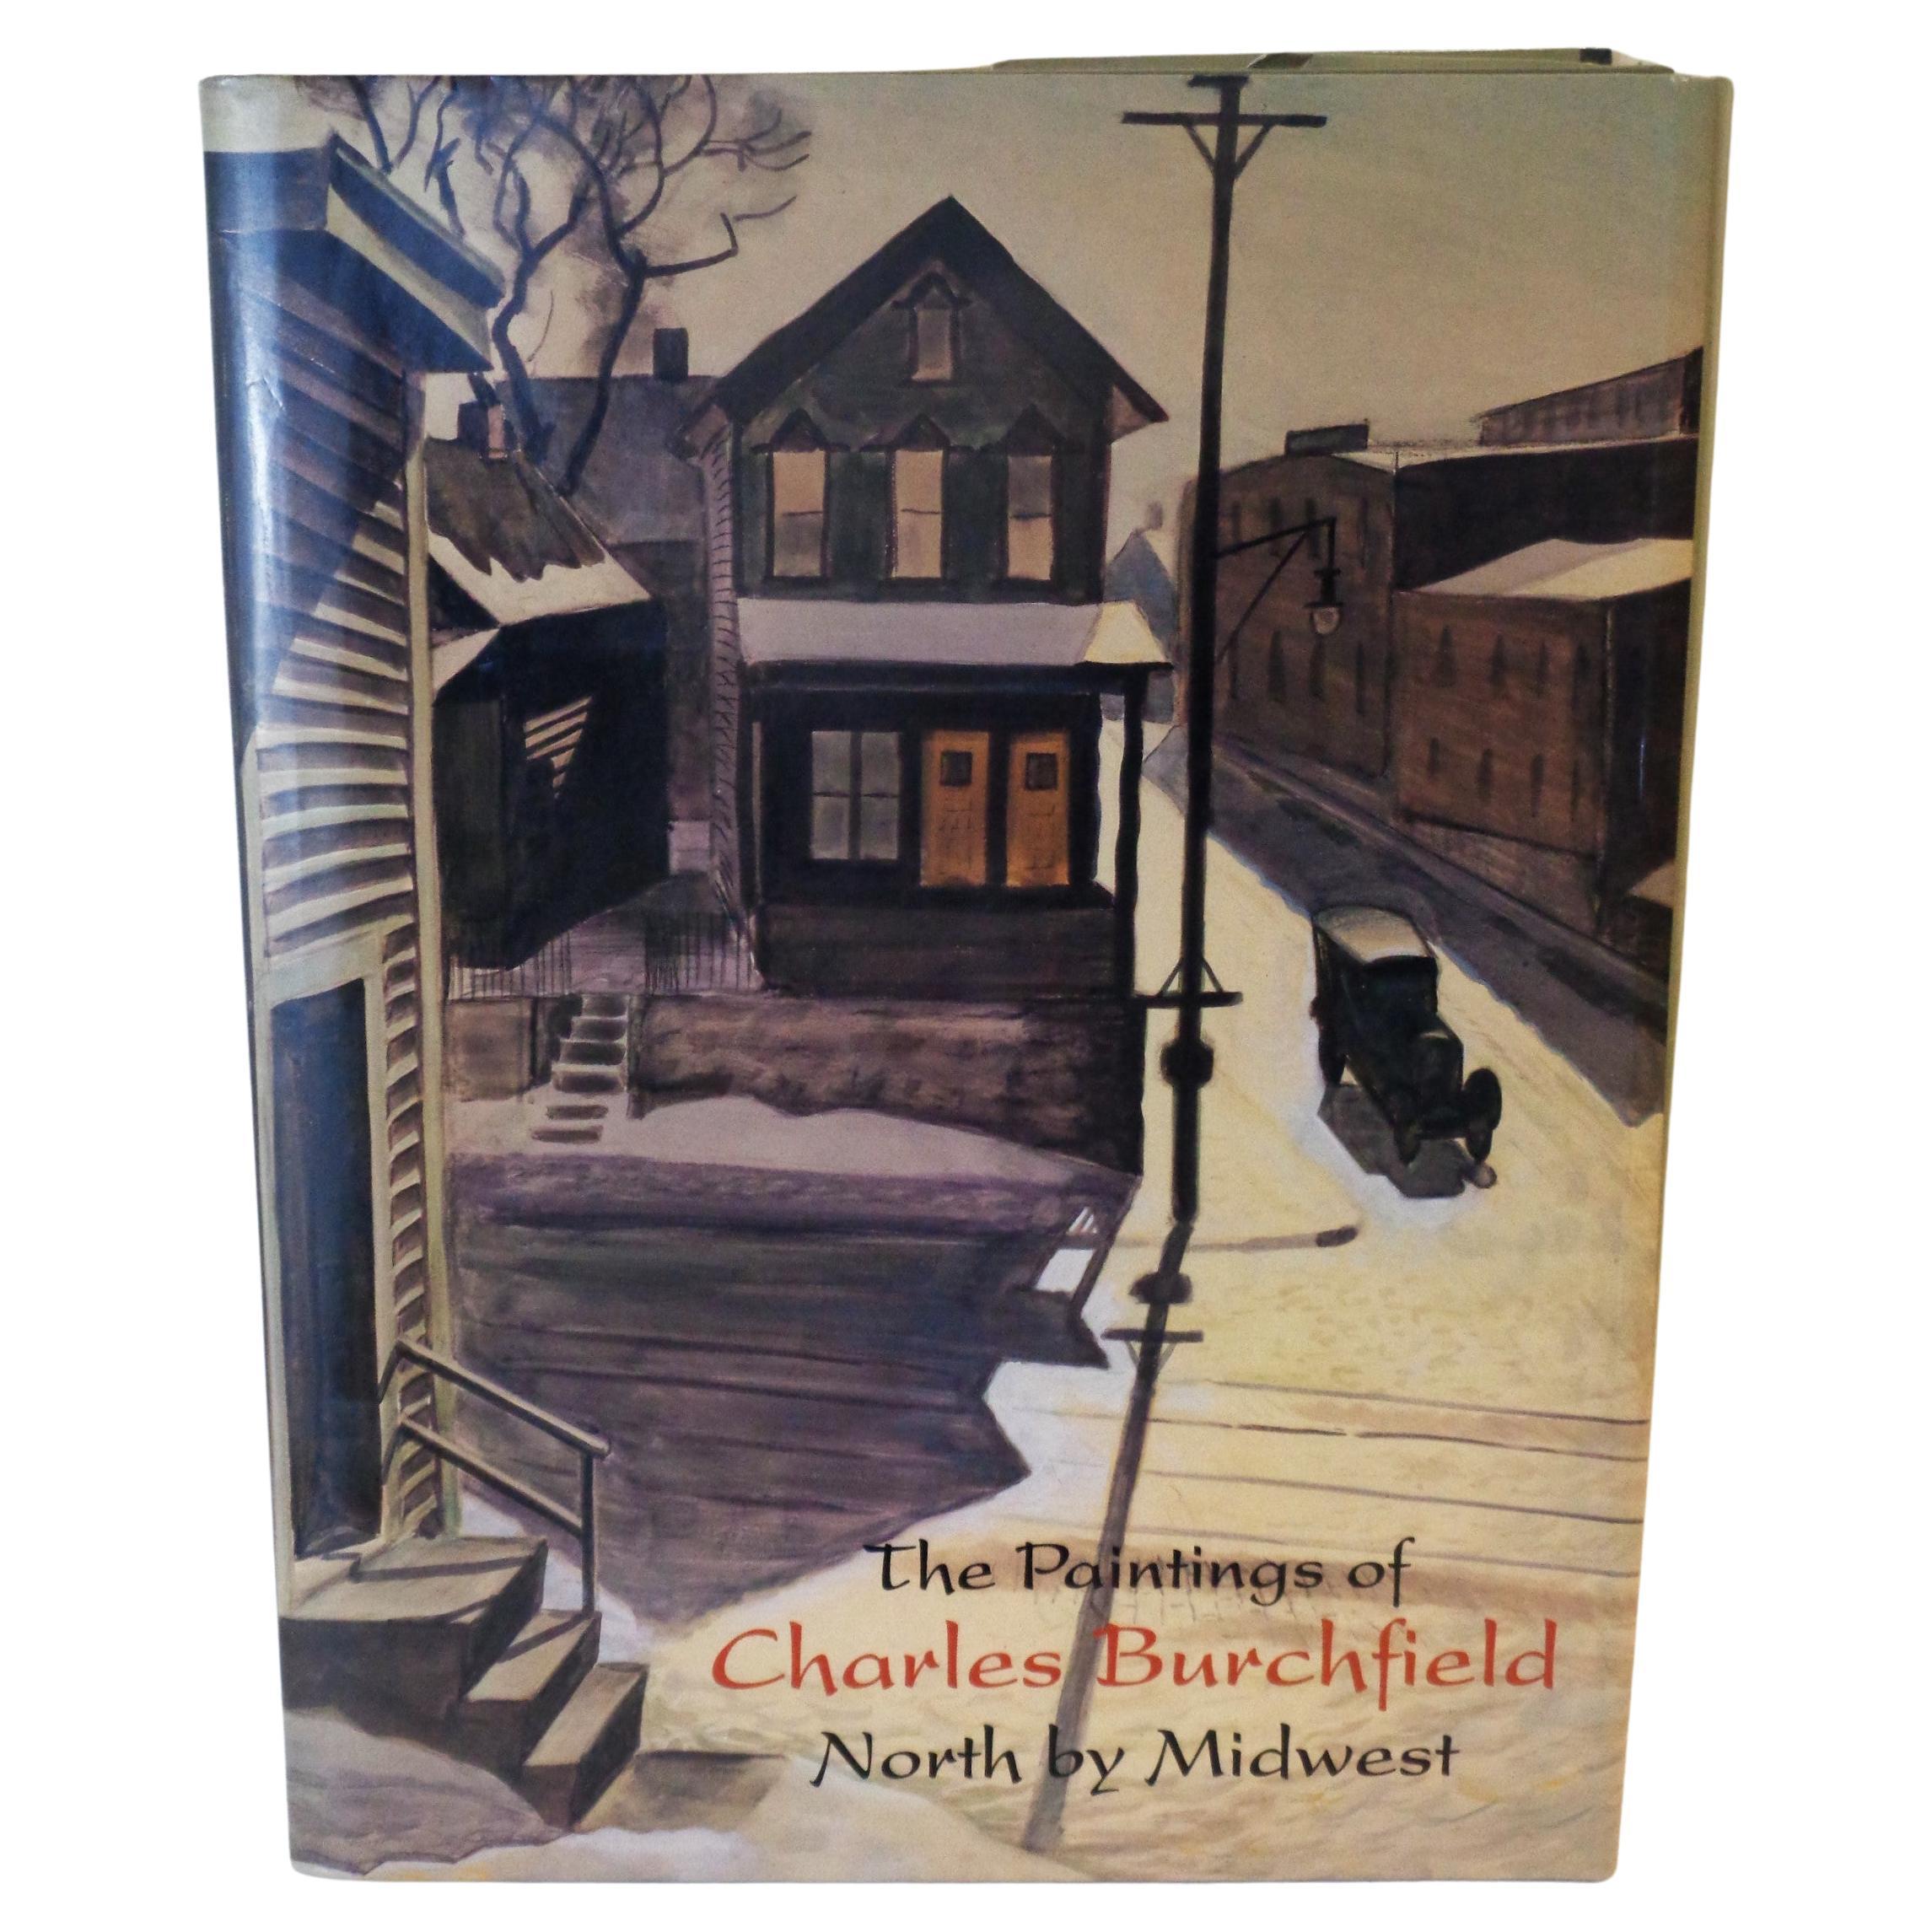 The Paintings of Charles Burchfield North by Midwest - 1997 Abrams, 1st Ed. 